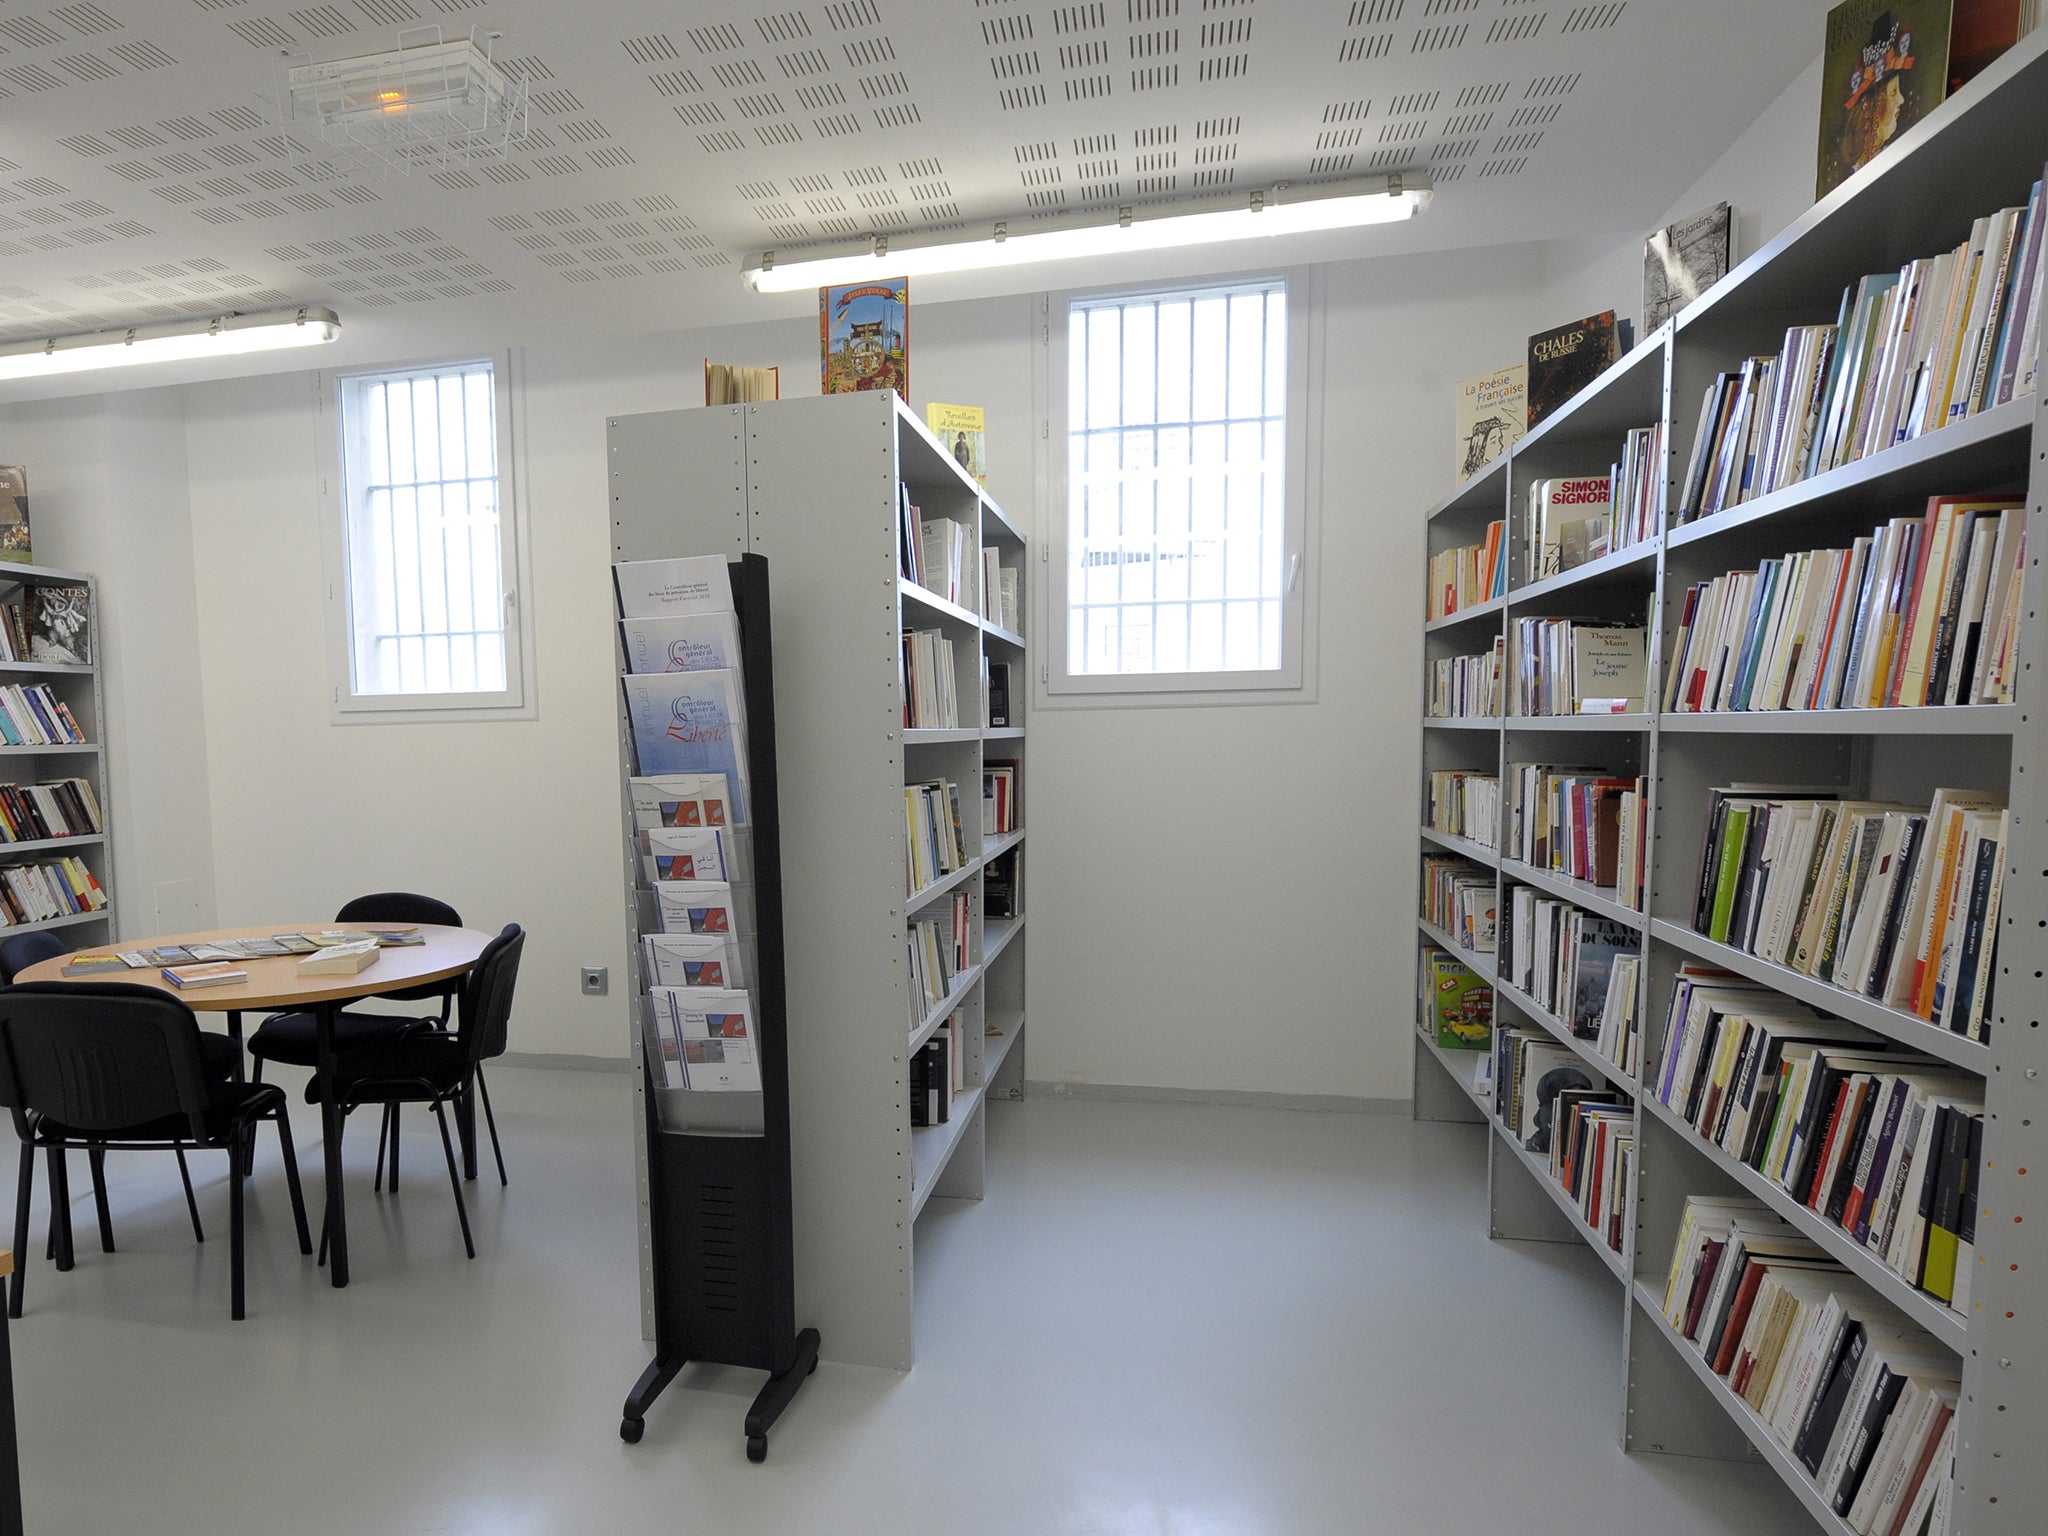 A library with a limited range of books in prison (Getty)